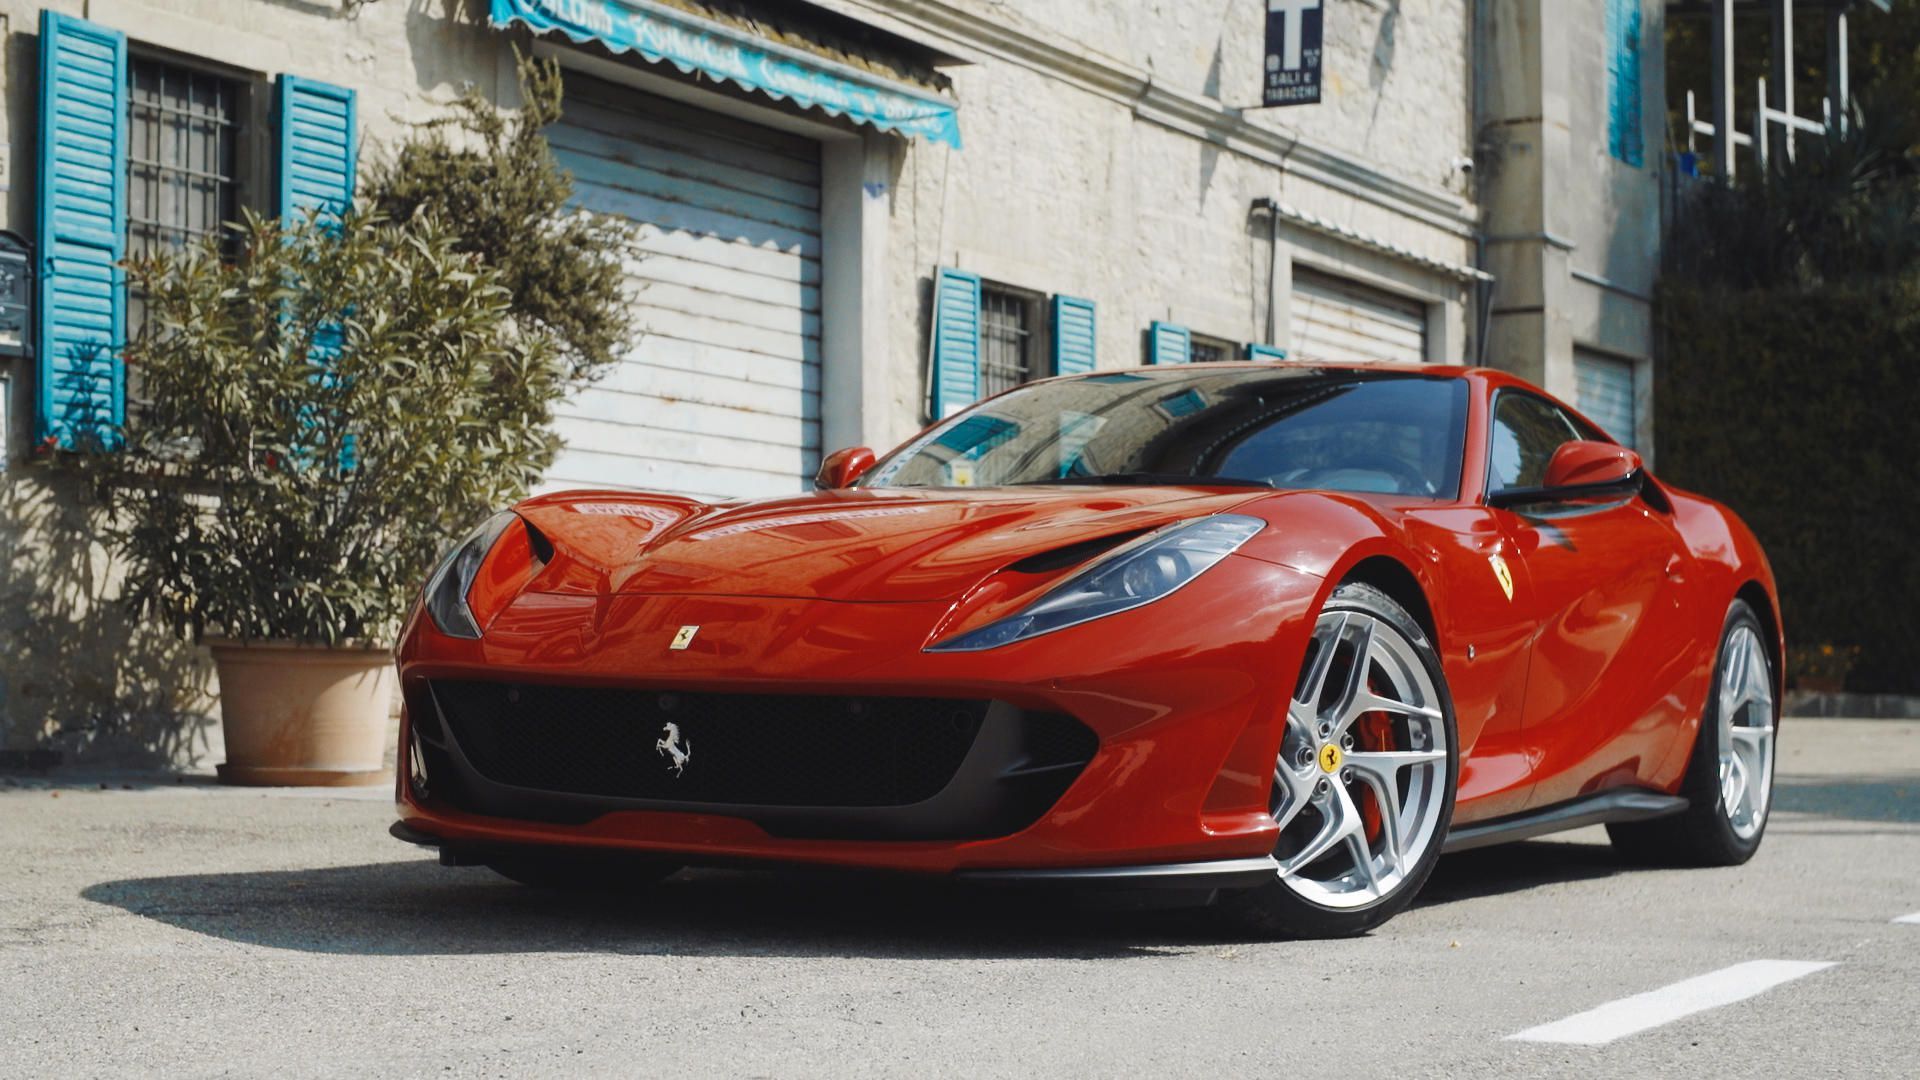 Reflections after a day with the Ferrari 812 Superfast